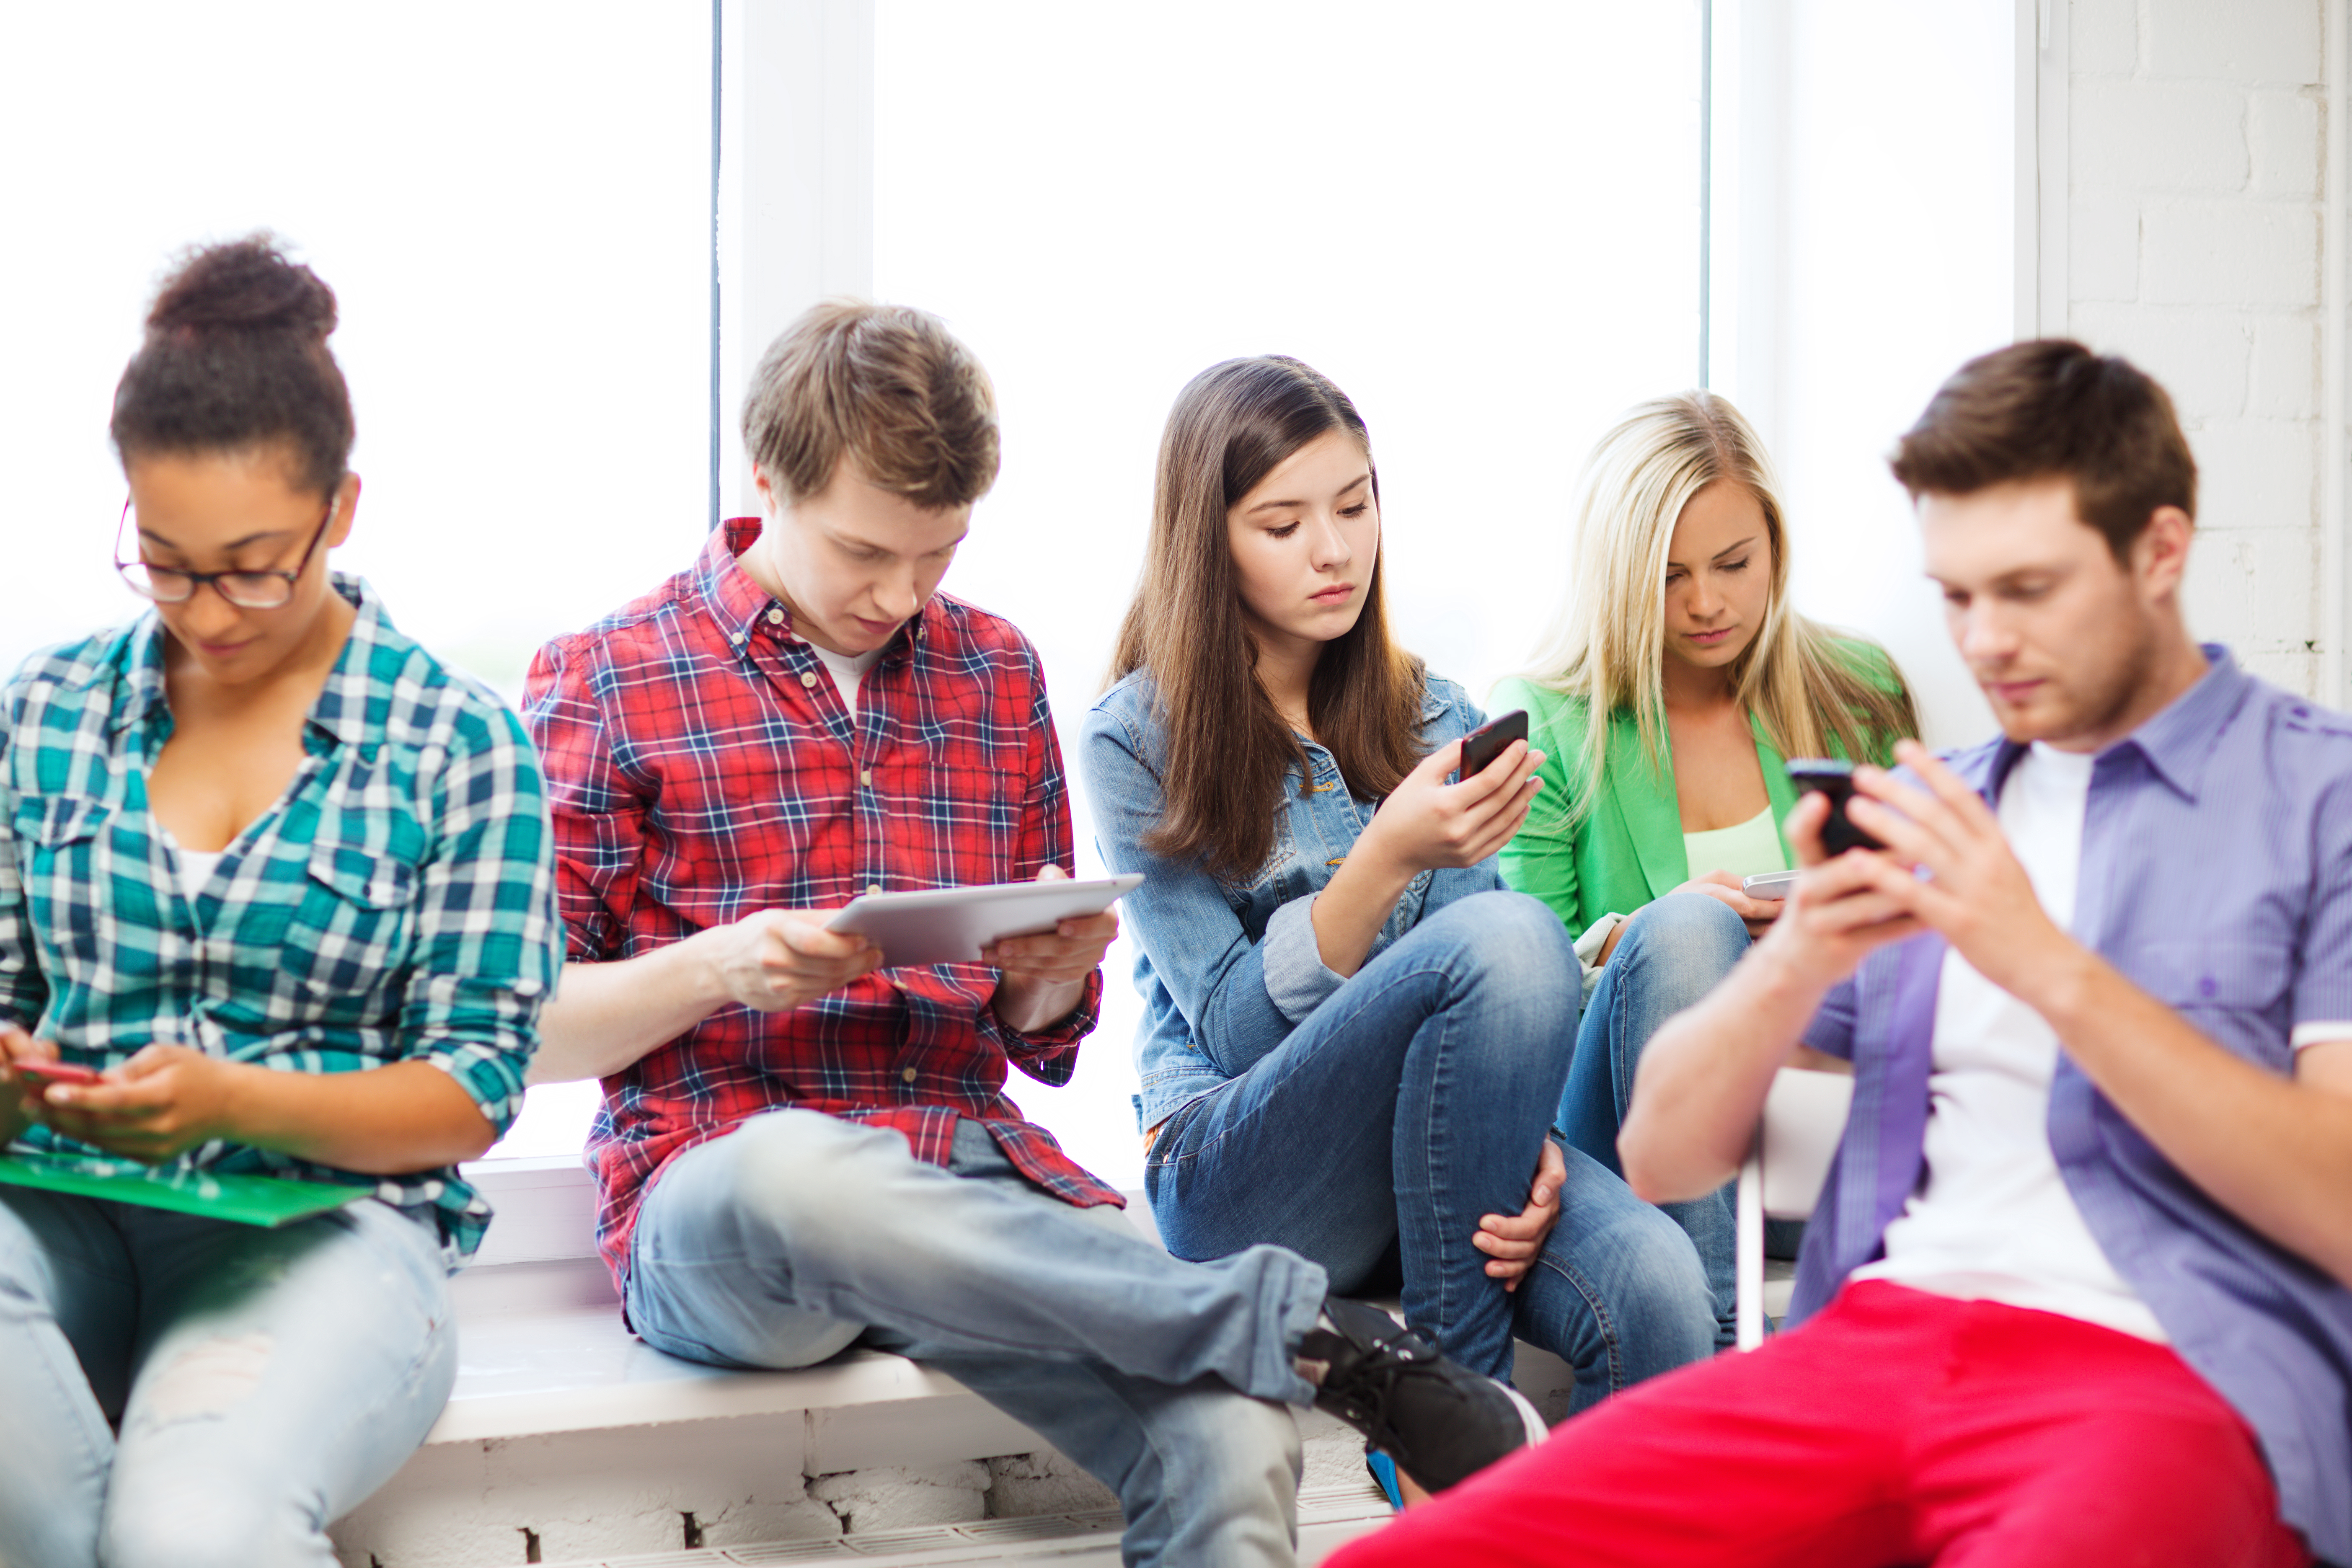 College students sitting in a lose circle, all on a tablet or phone device.